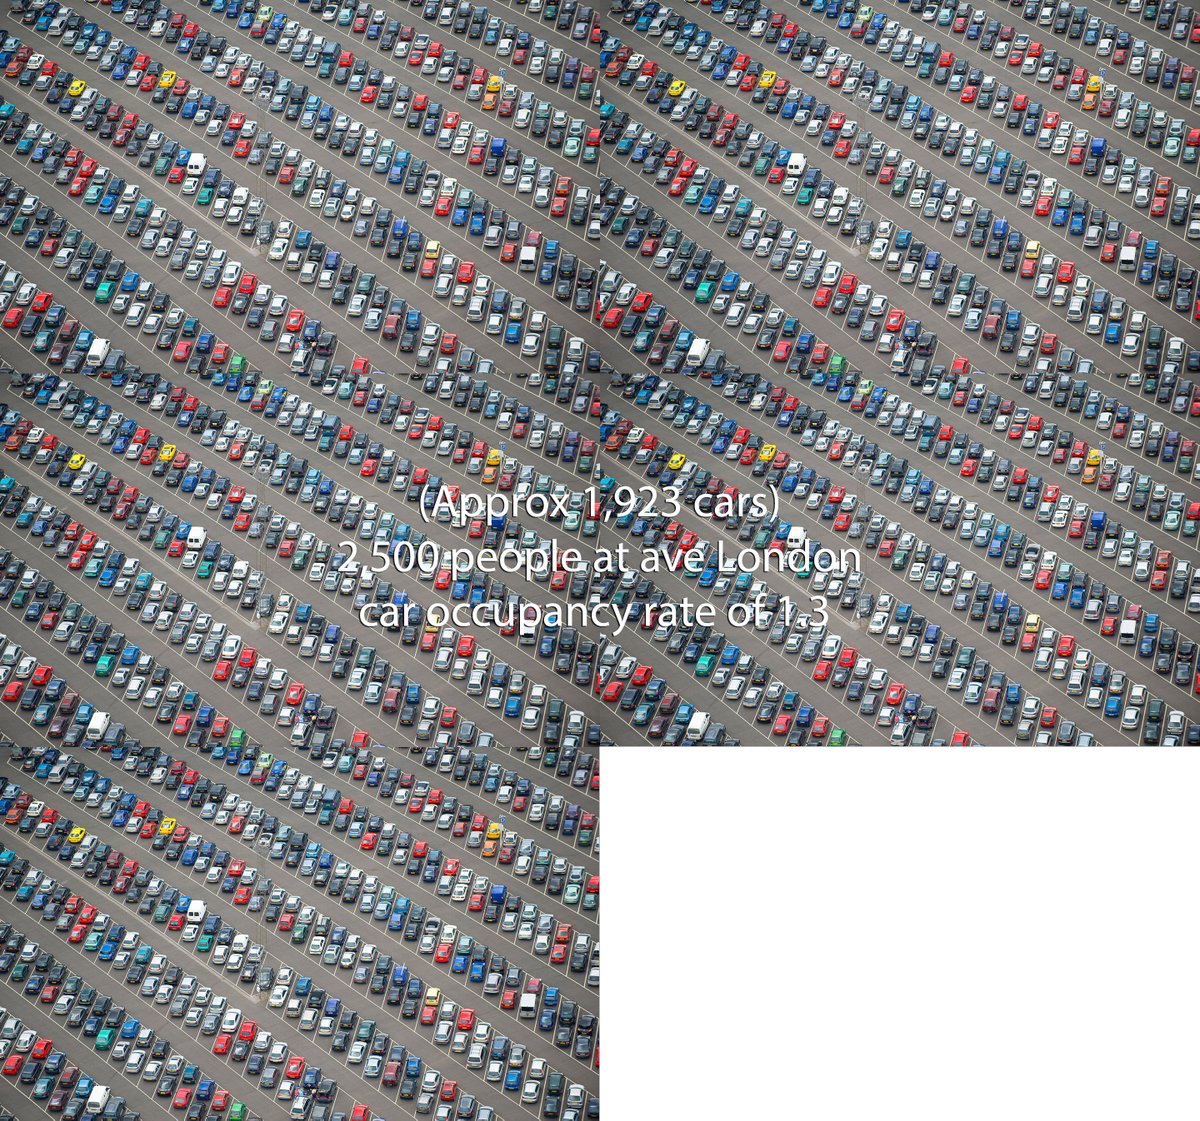 If the same amount of people had used cars at the London average occupancy rate (1.3), it would have looked something like this (pics represent approx. 923 or 1,923 cars). With 1m in between each car, this number would stretch nearly 7km or 14km of road - some traffic jam!